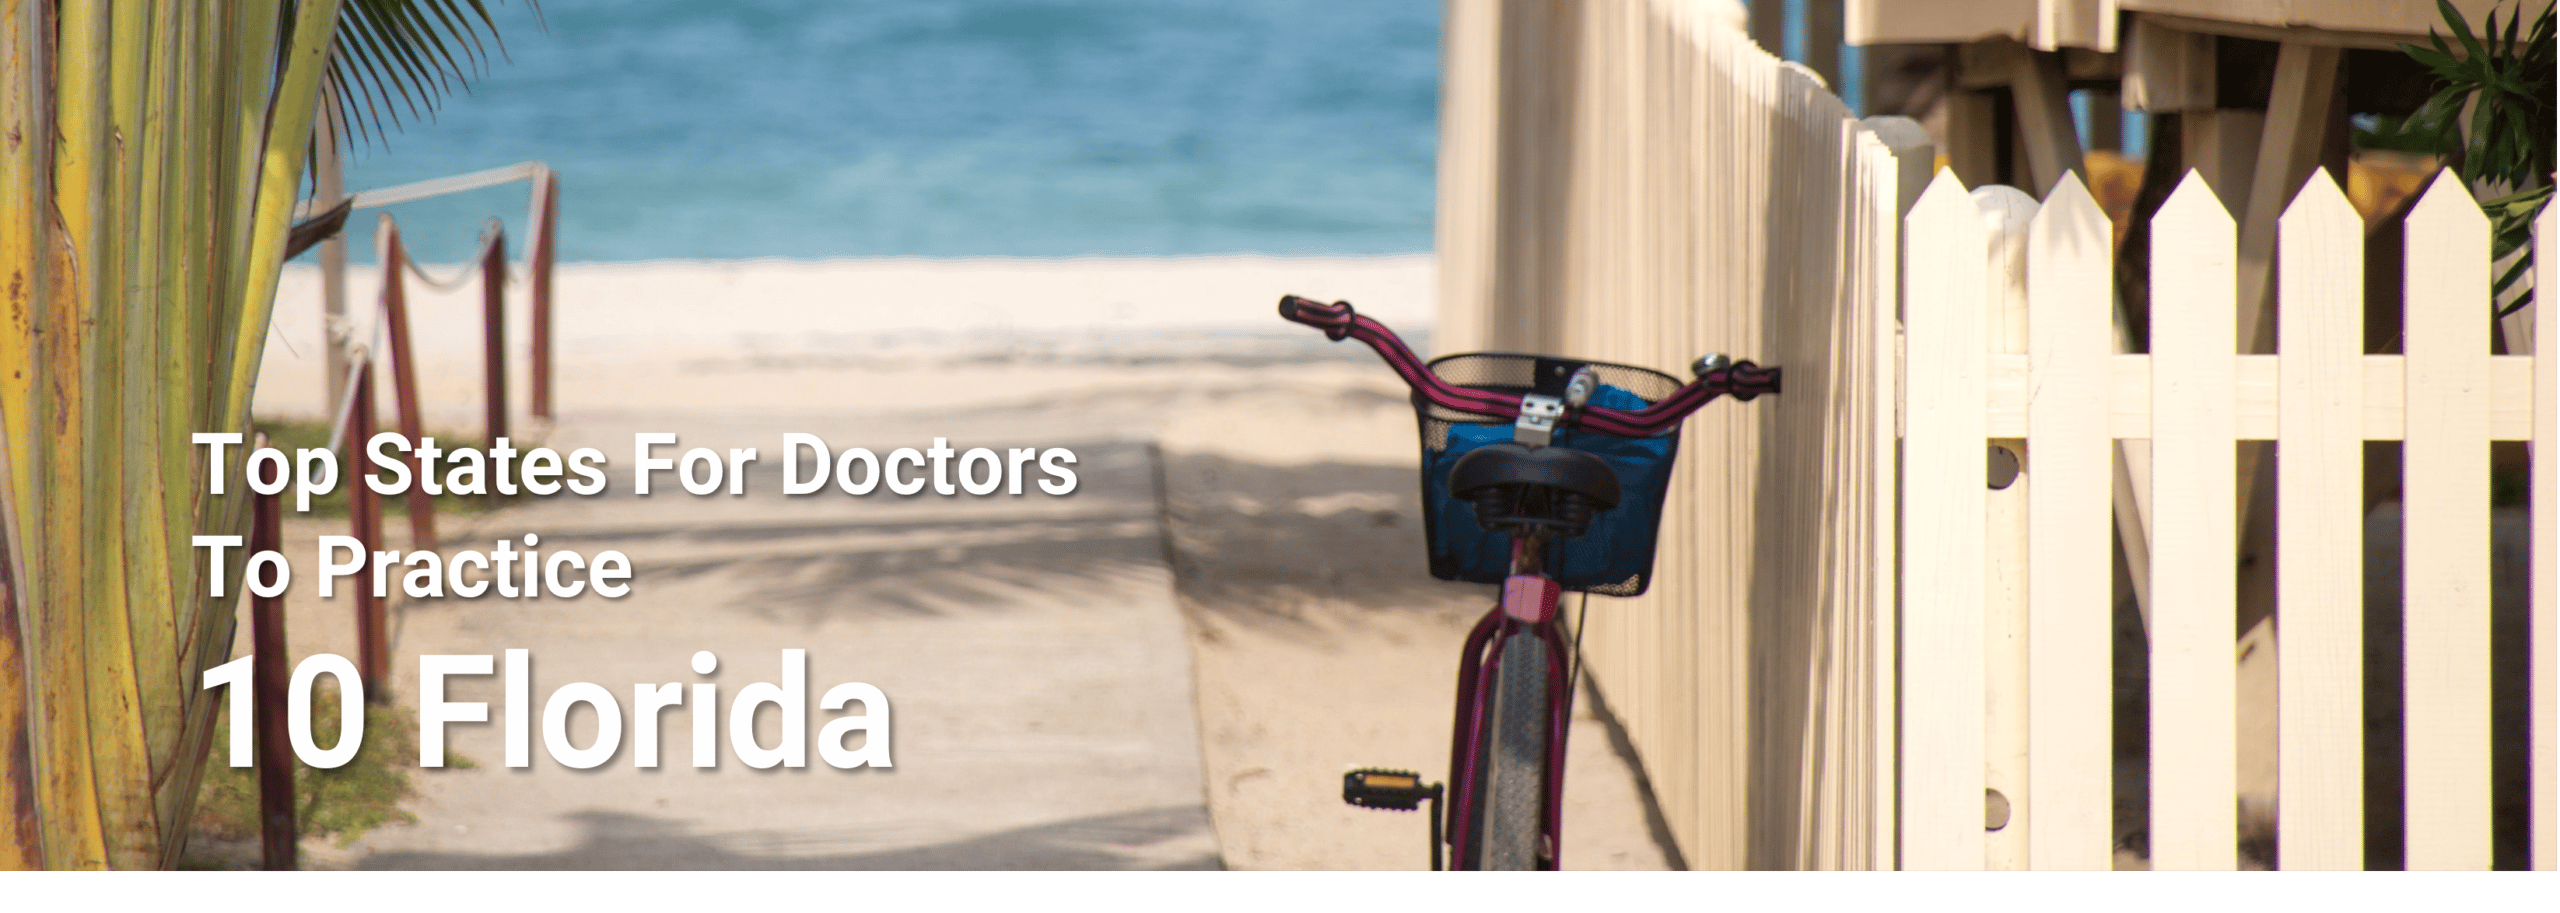 Top States for Doctors to Practice 10 Florida